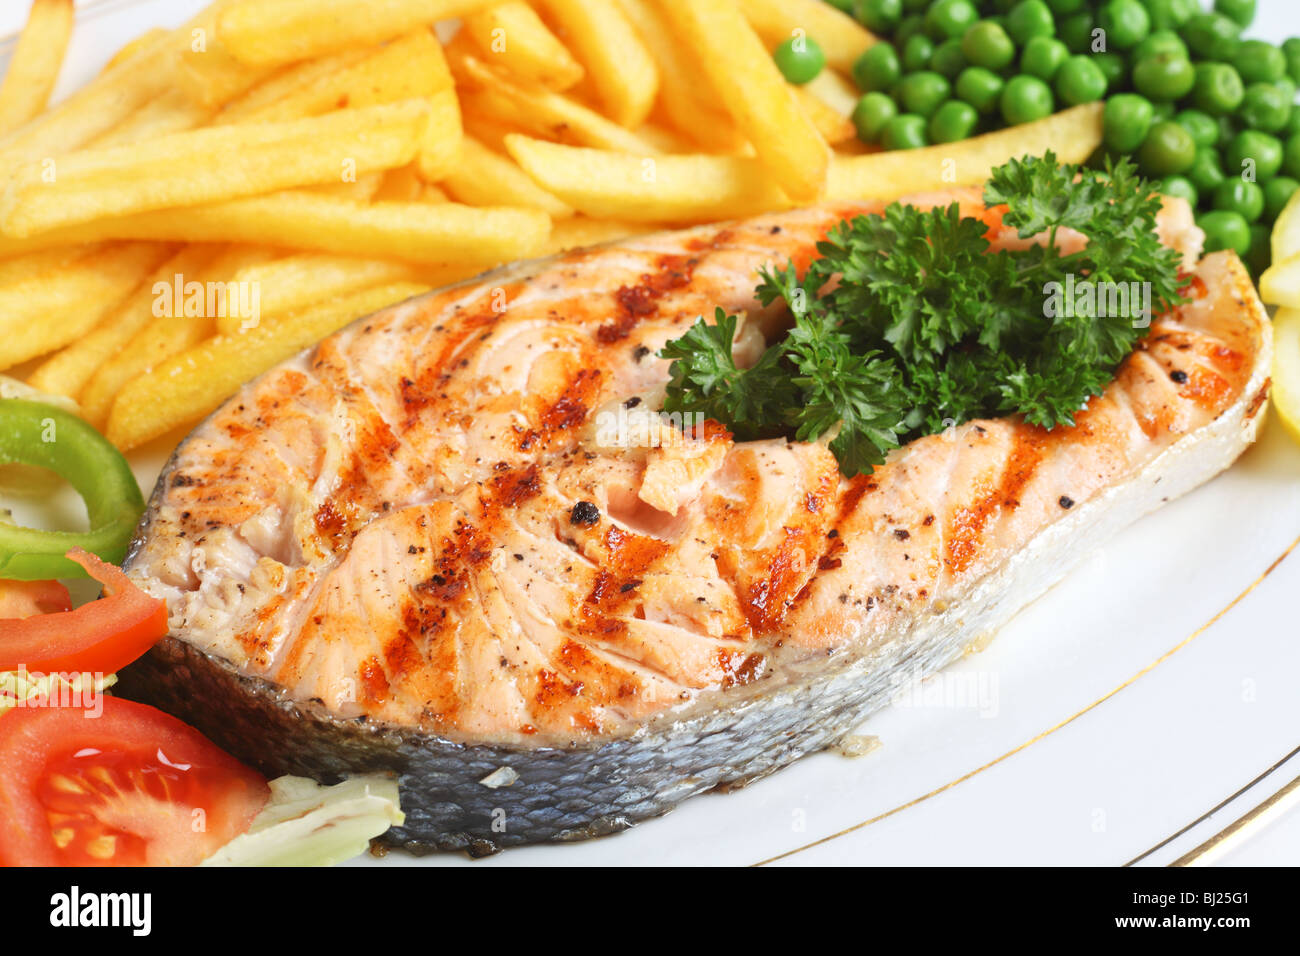 A close-up view of a grilled salmon steak served with salad, chips ...